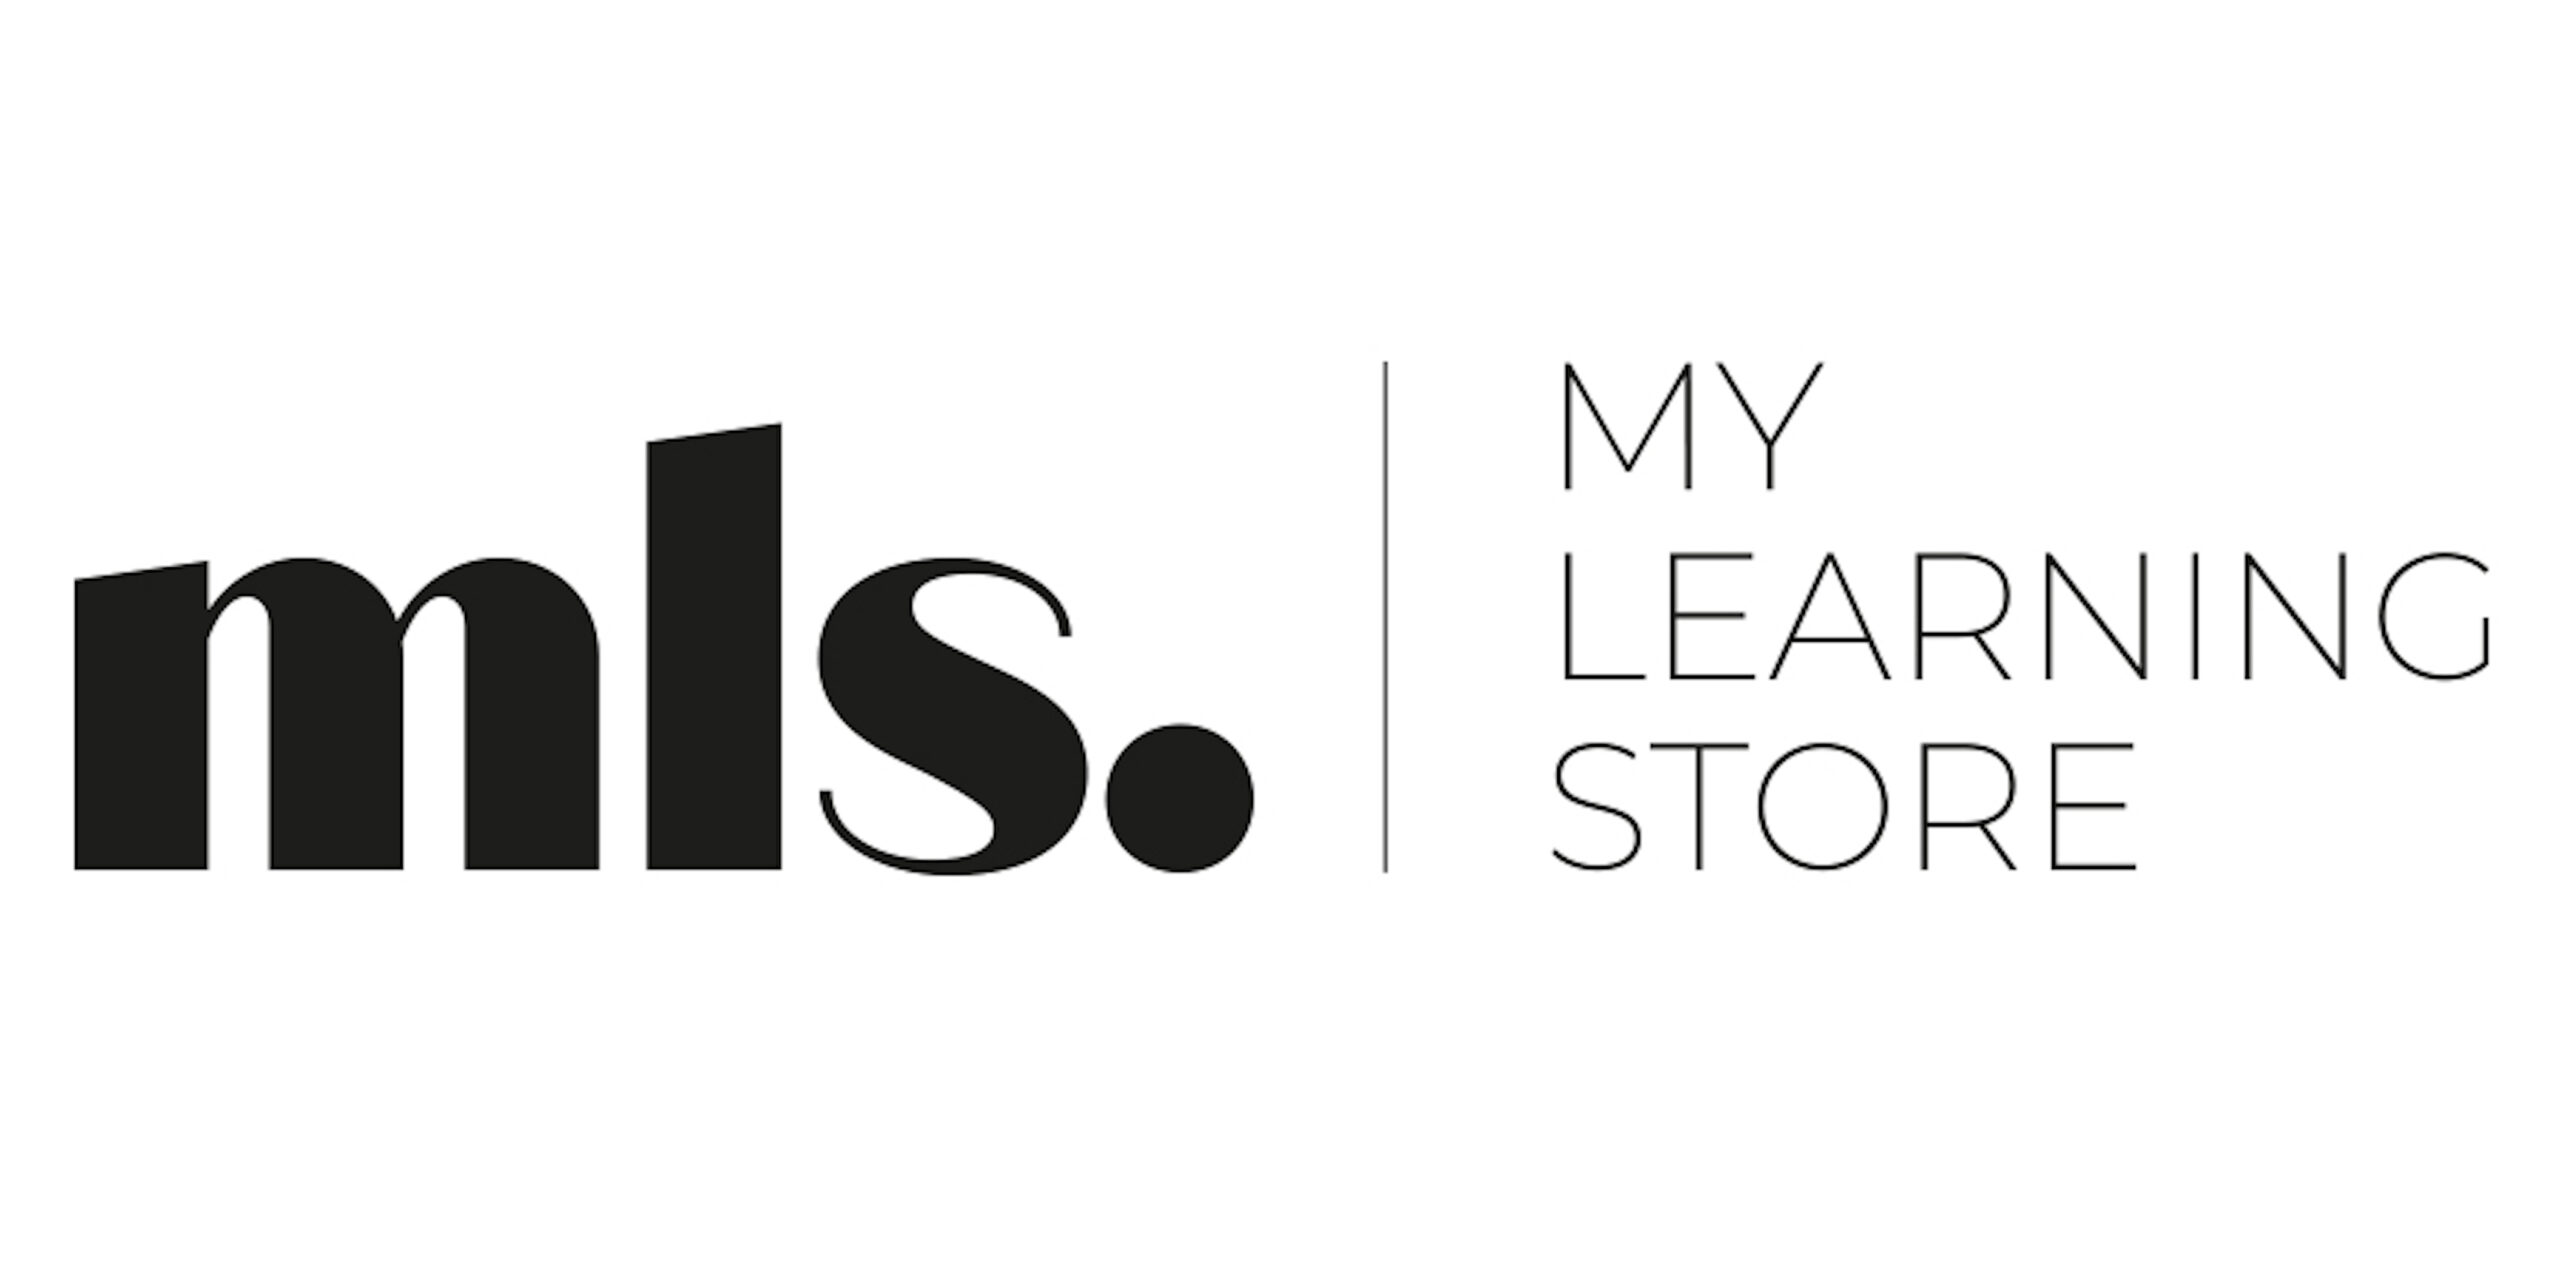 My Learning Store